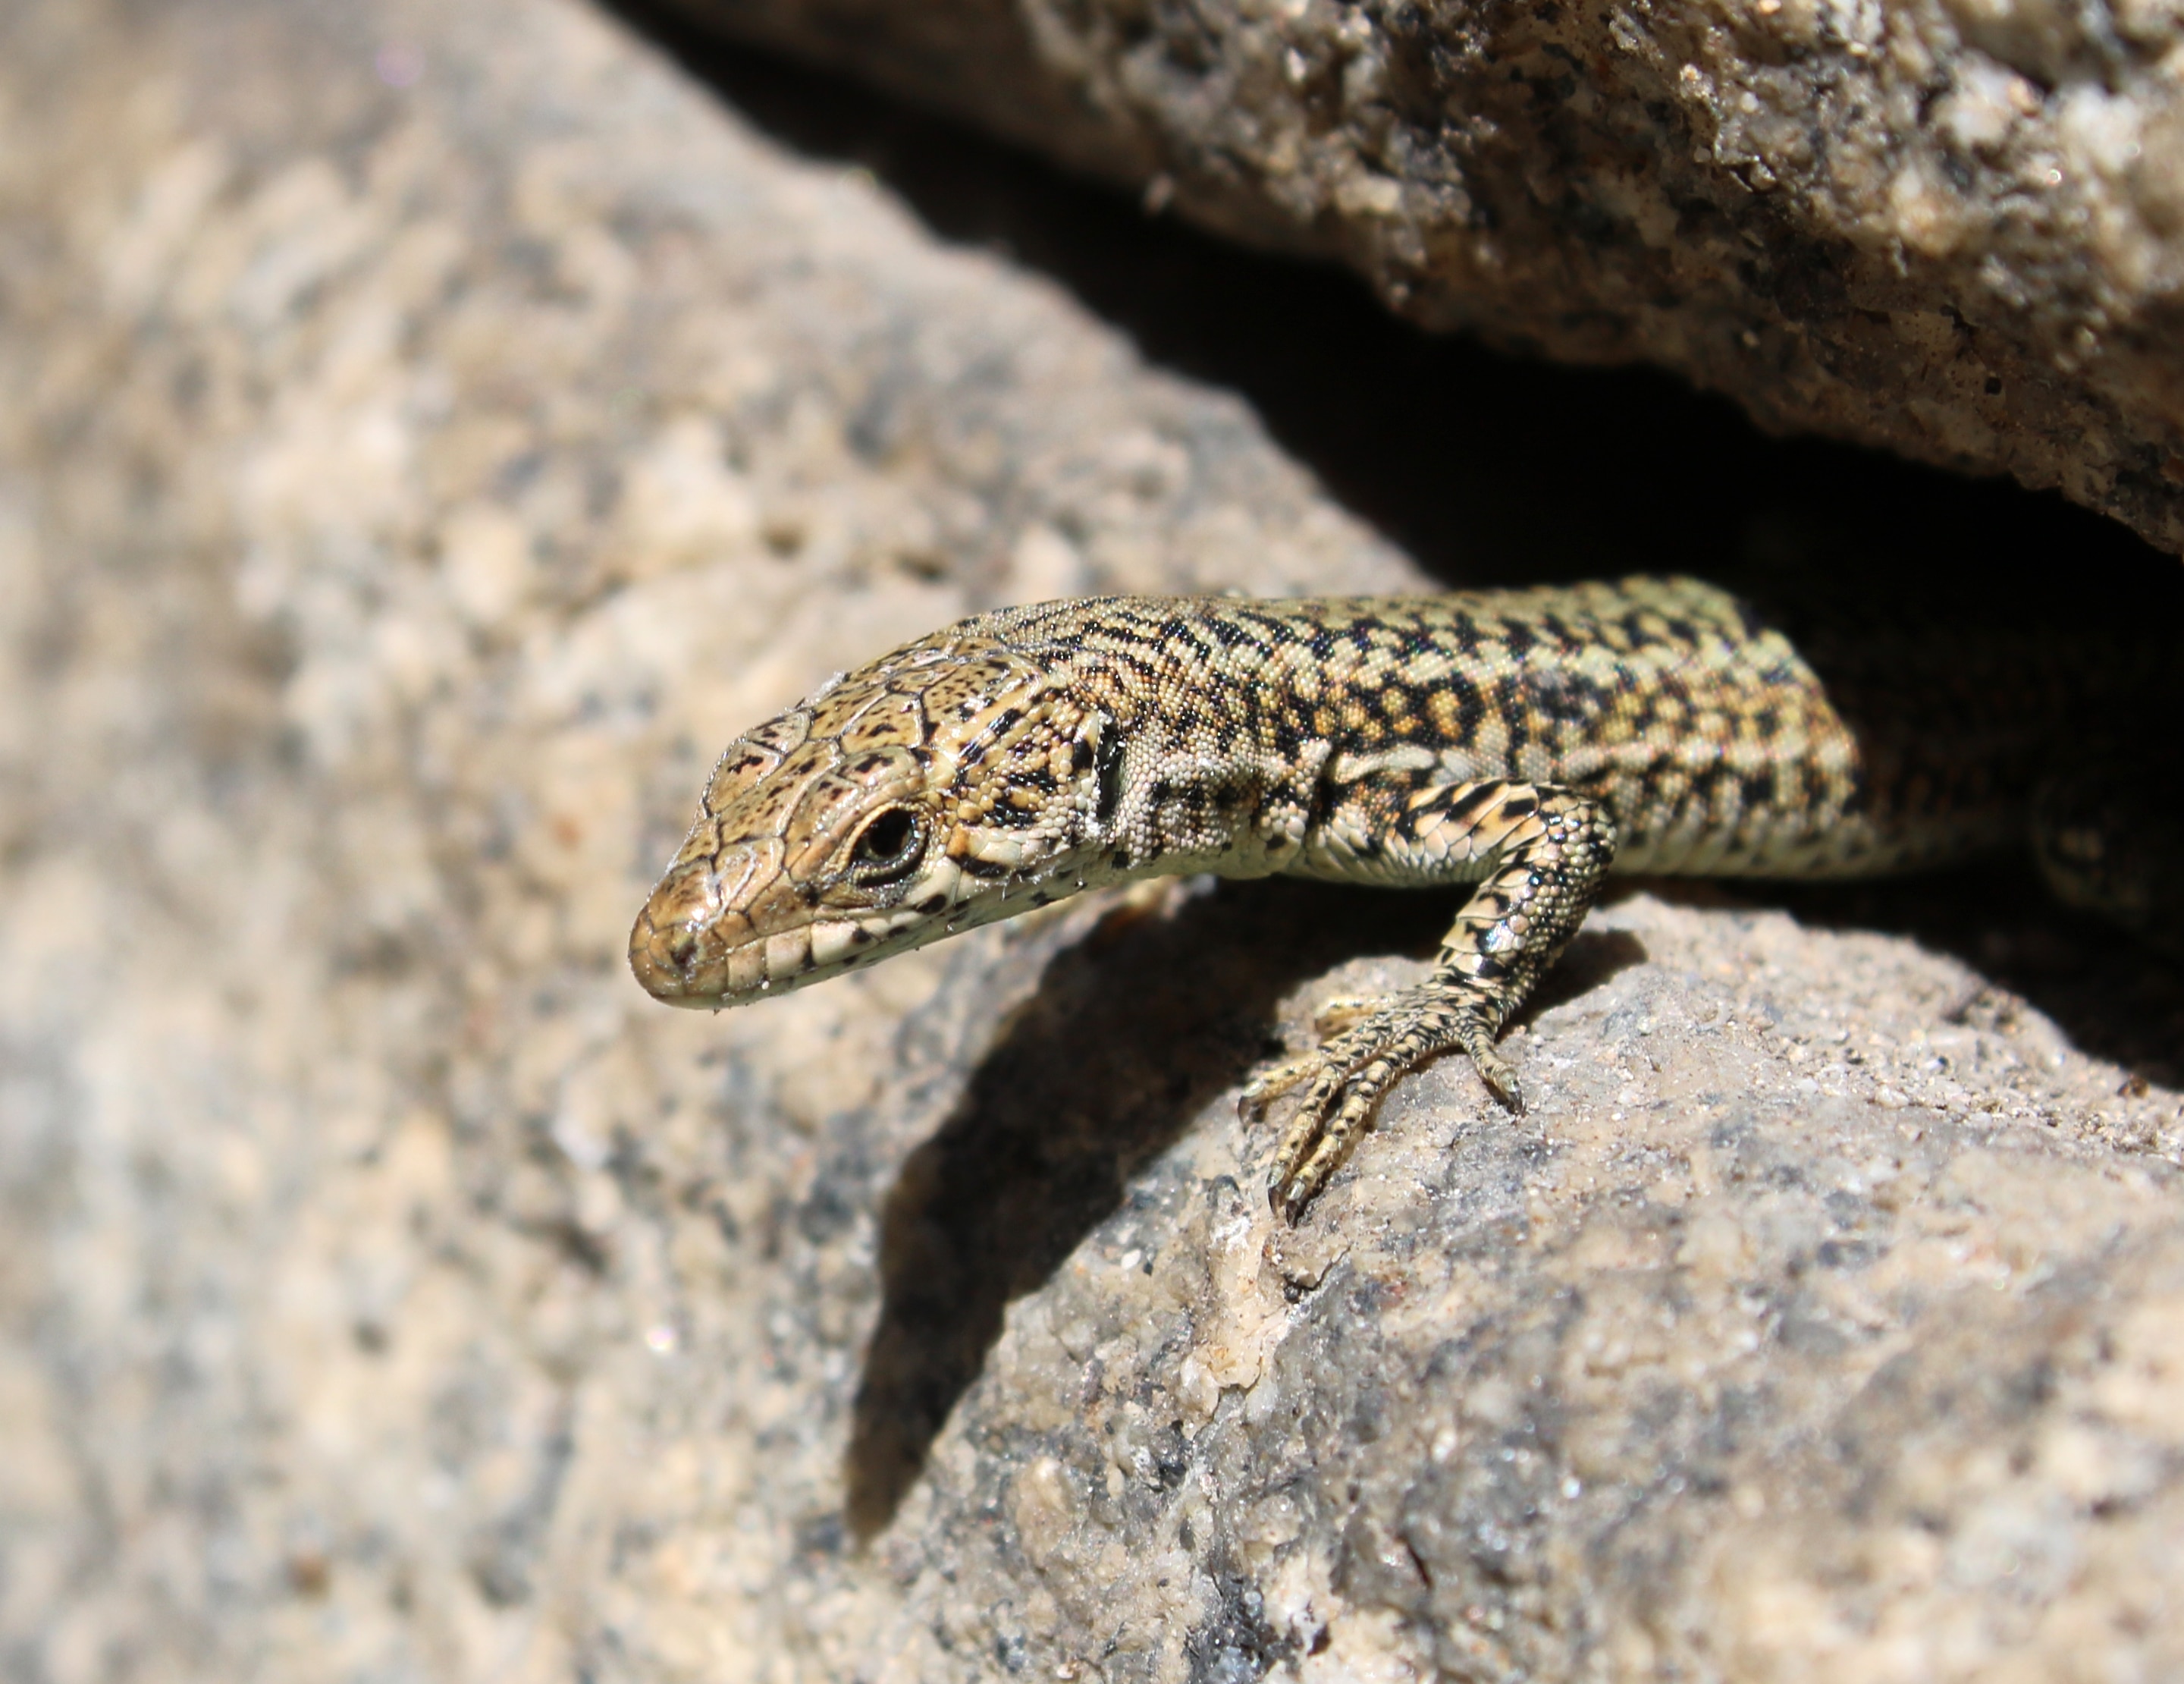 beige and black lizard at daytime4